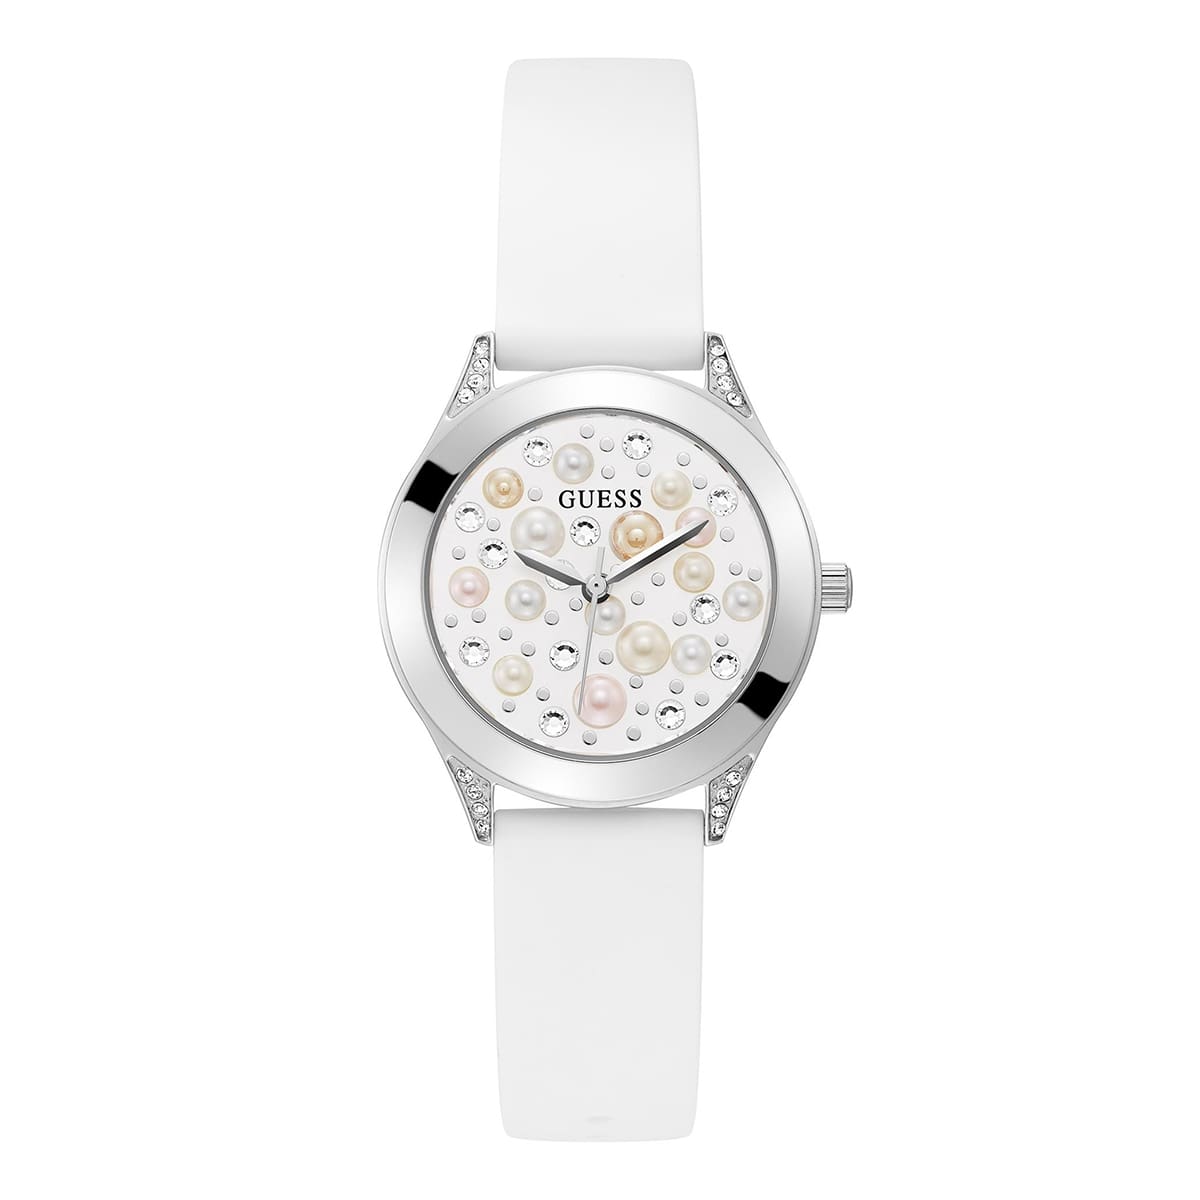 MONTRE GUESS ONLY TIME FEMME SILICONE